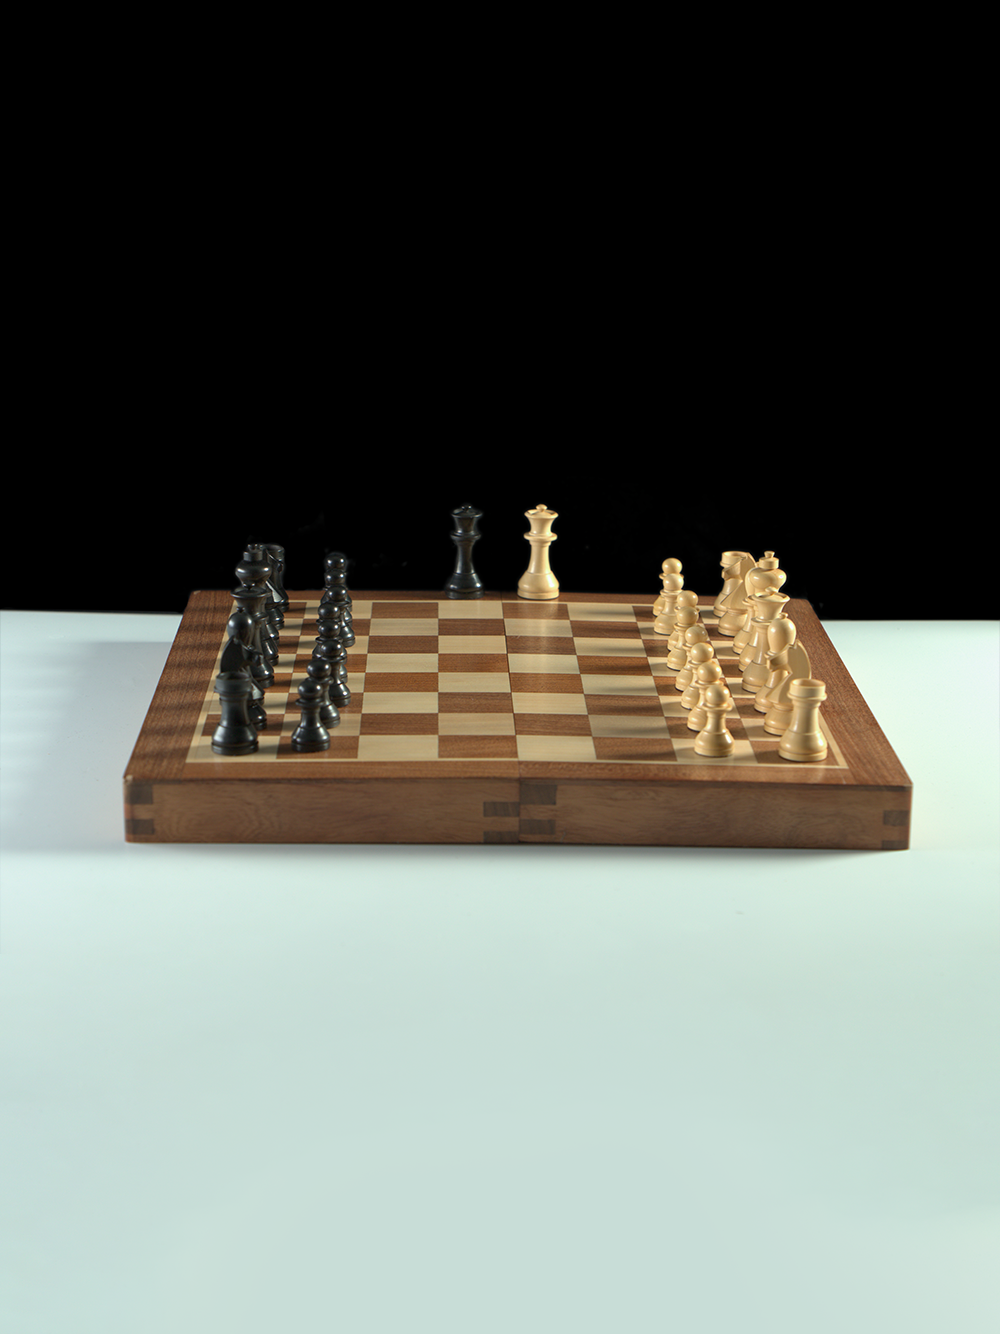 Official World Chess Pieces - buy online with worldwide shipping